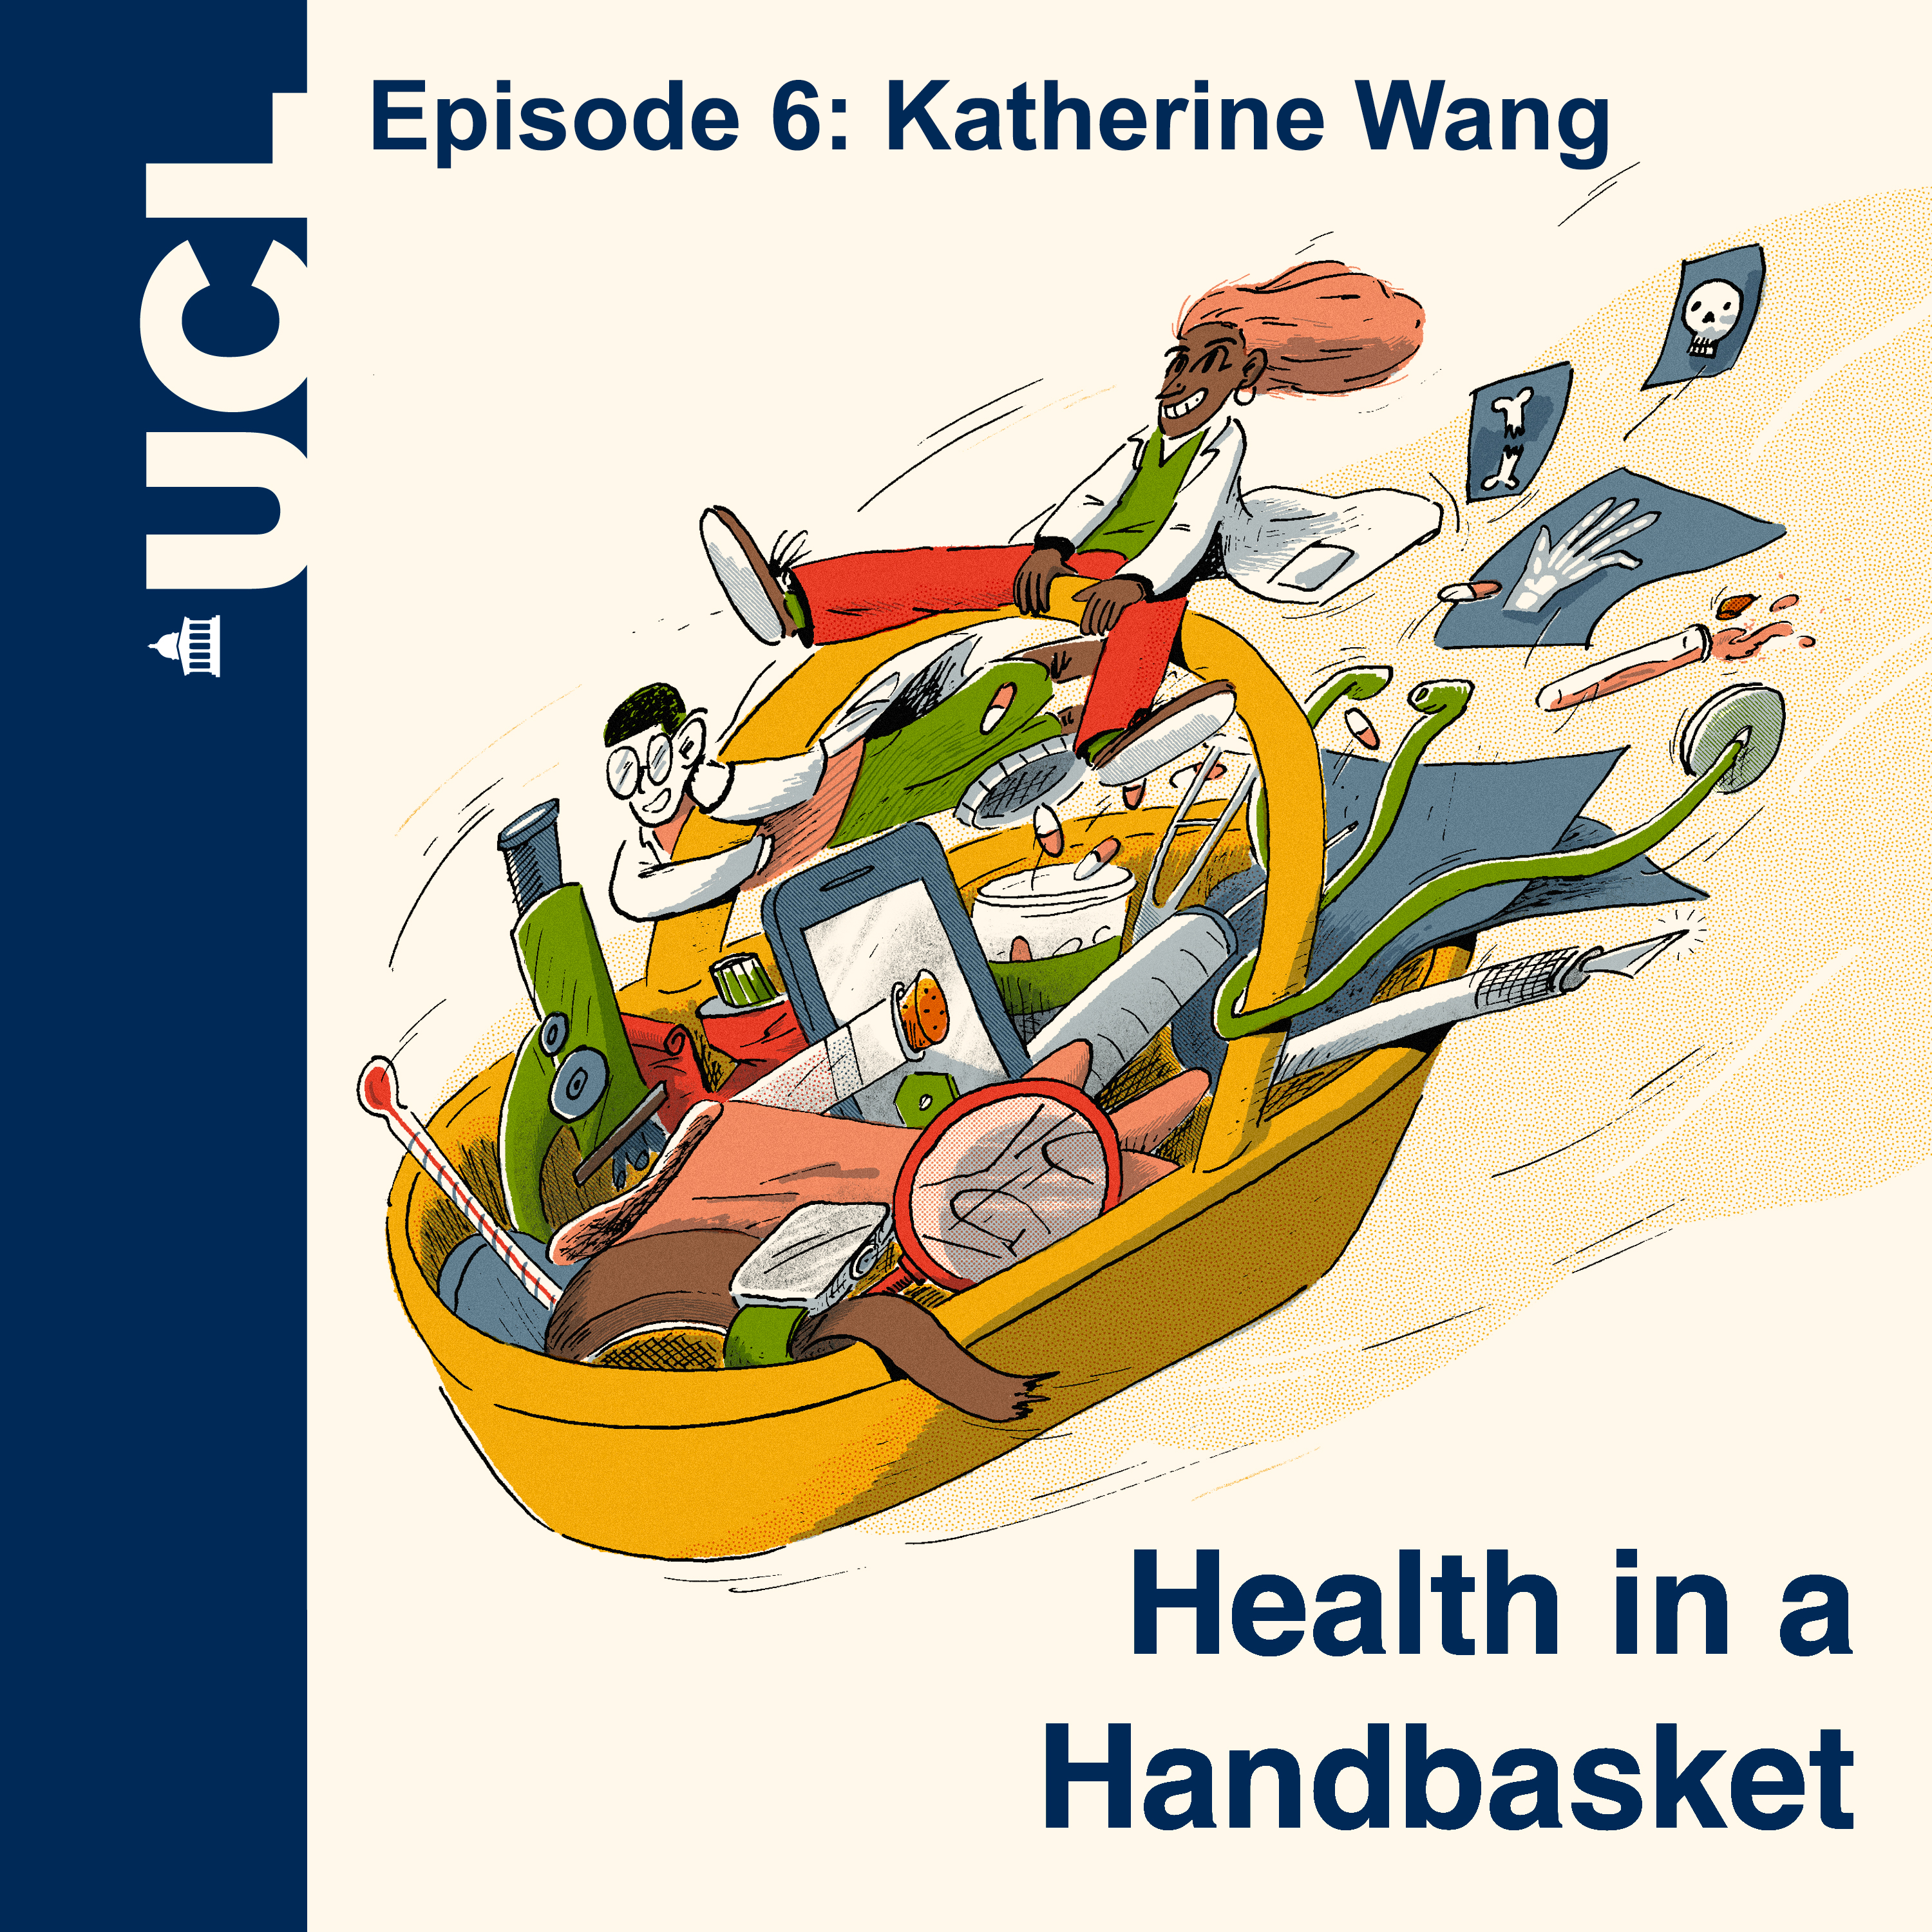 Promotional image for Katherine Wang's episode. People in a basket flying off